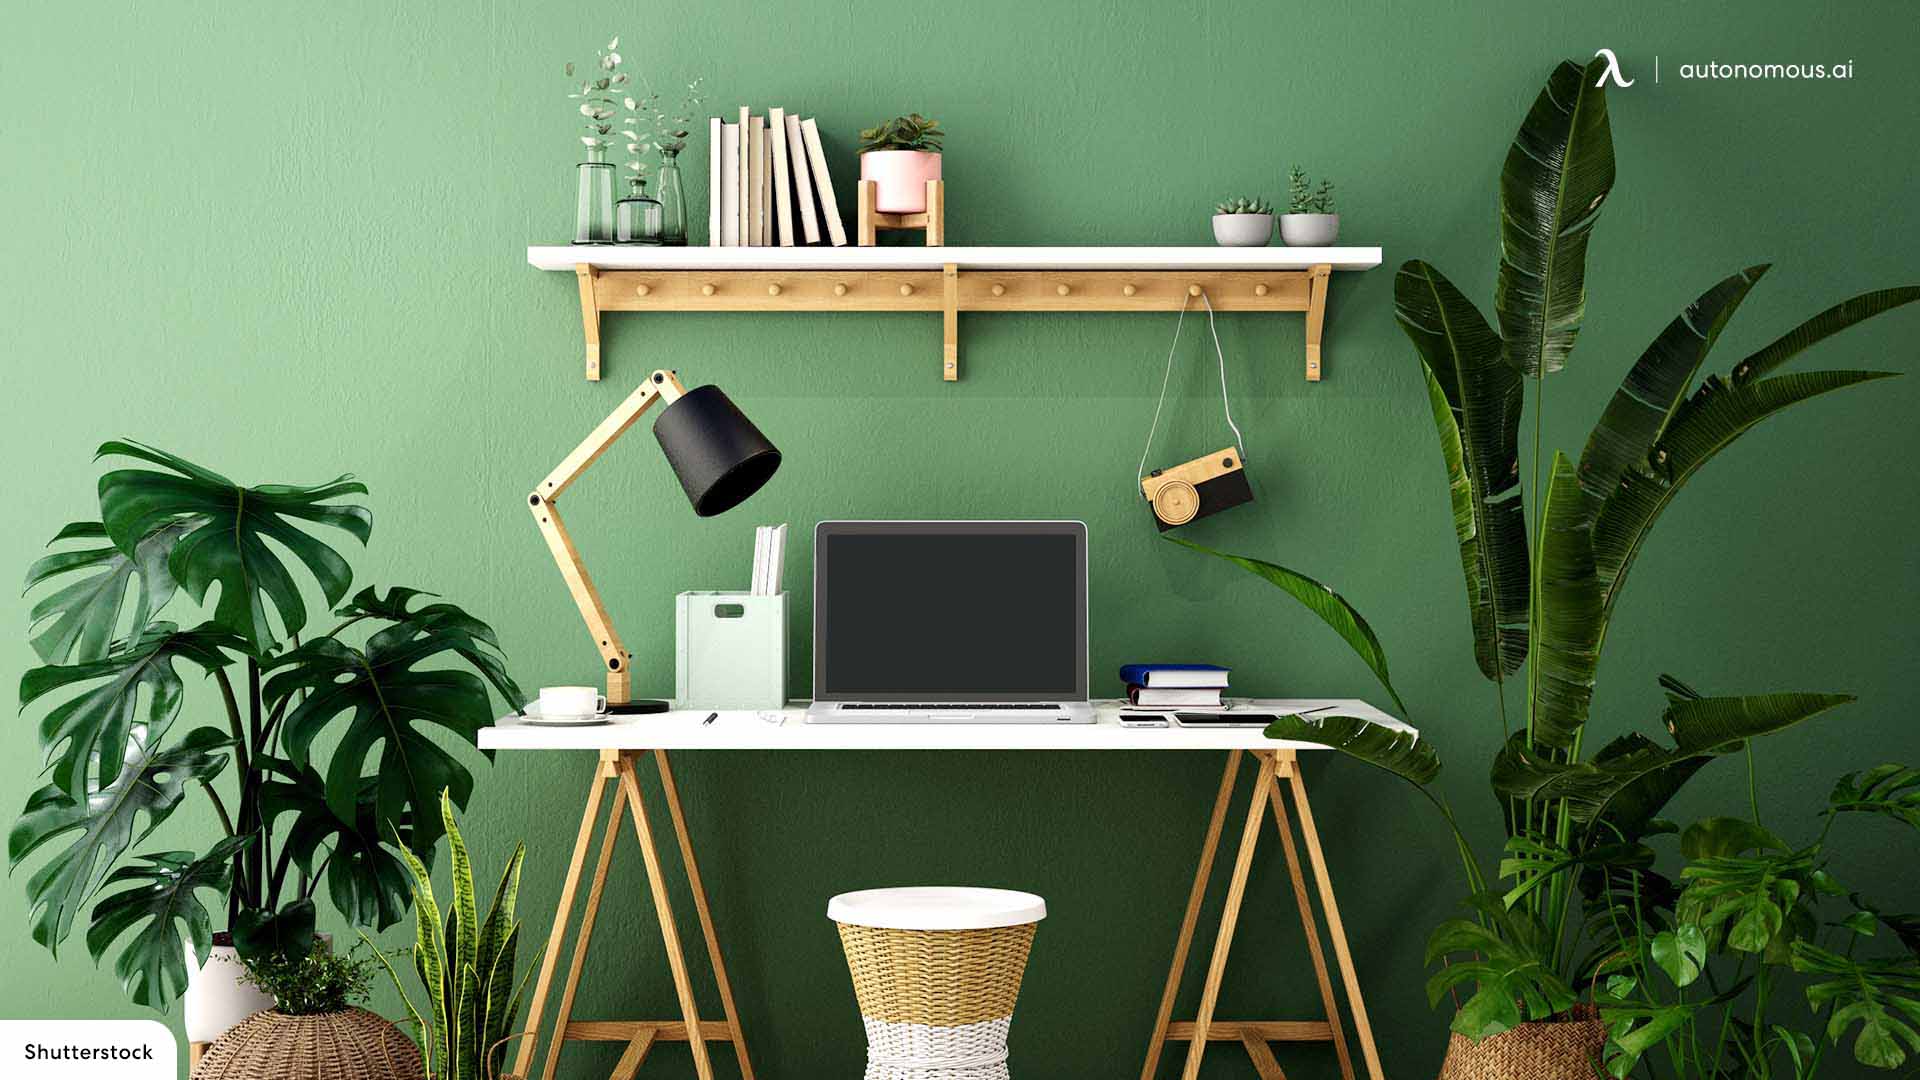 Go Natural as home office ideas